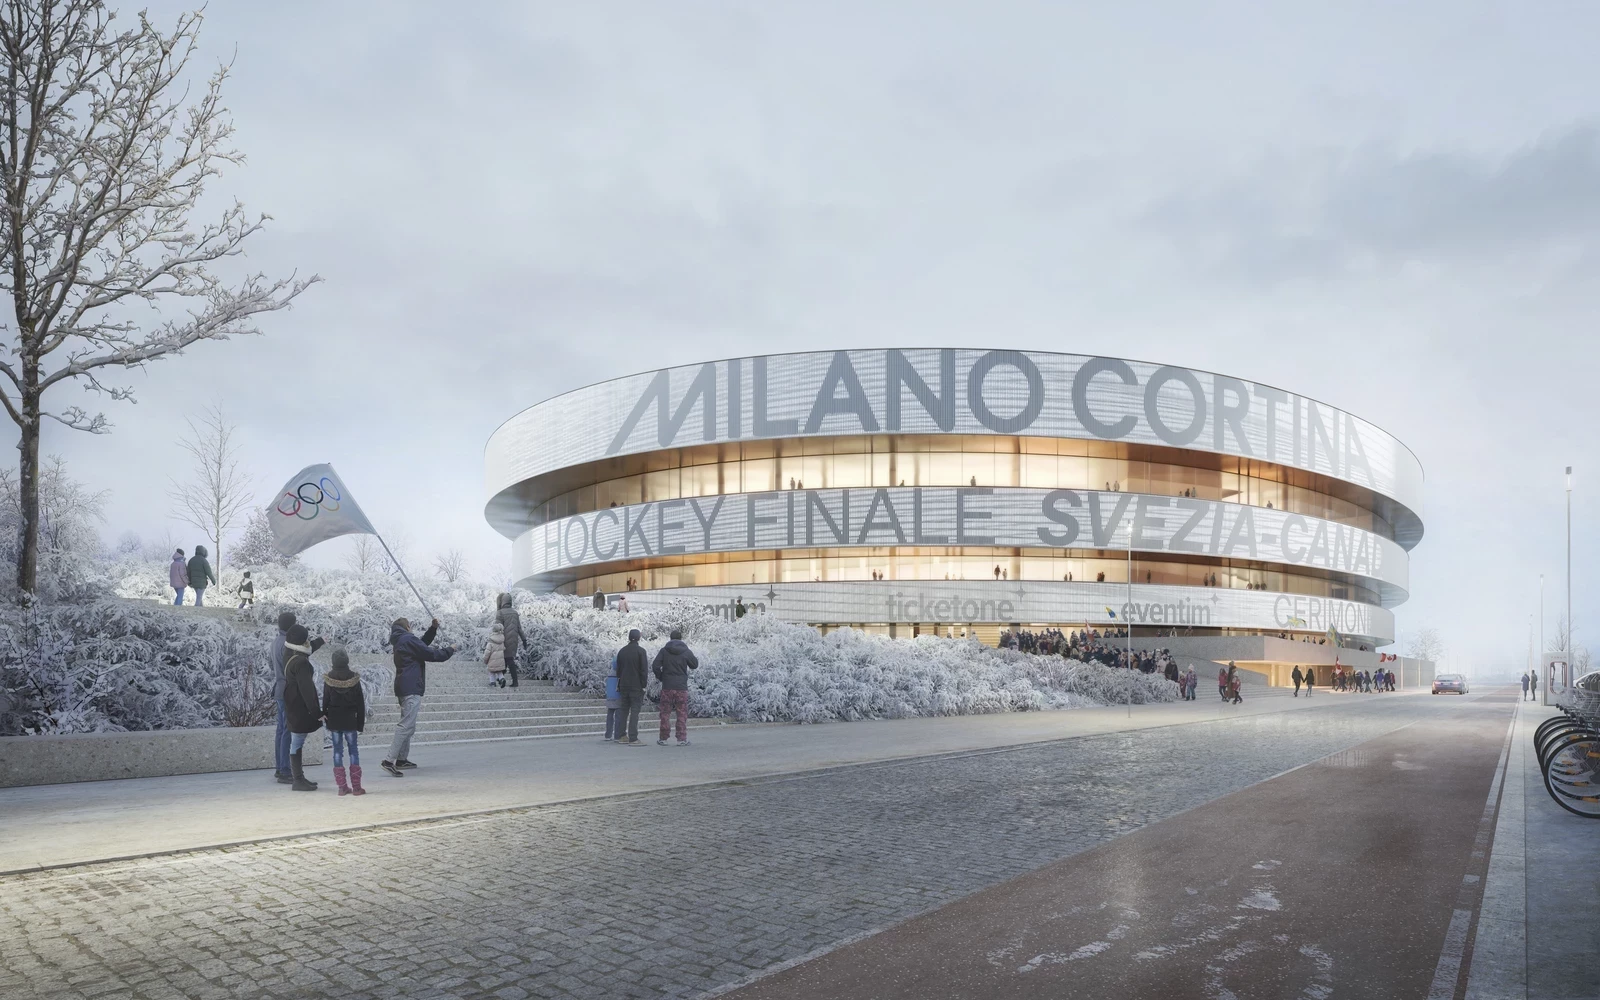 Piling work to start on ice hockey venue for Milan Cortina 2026 